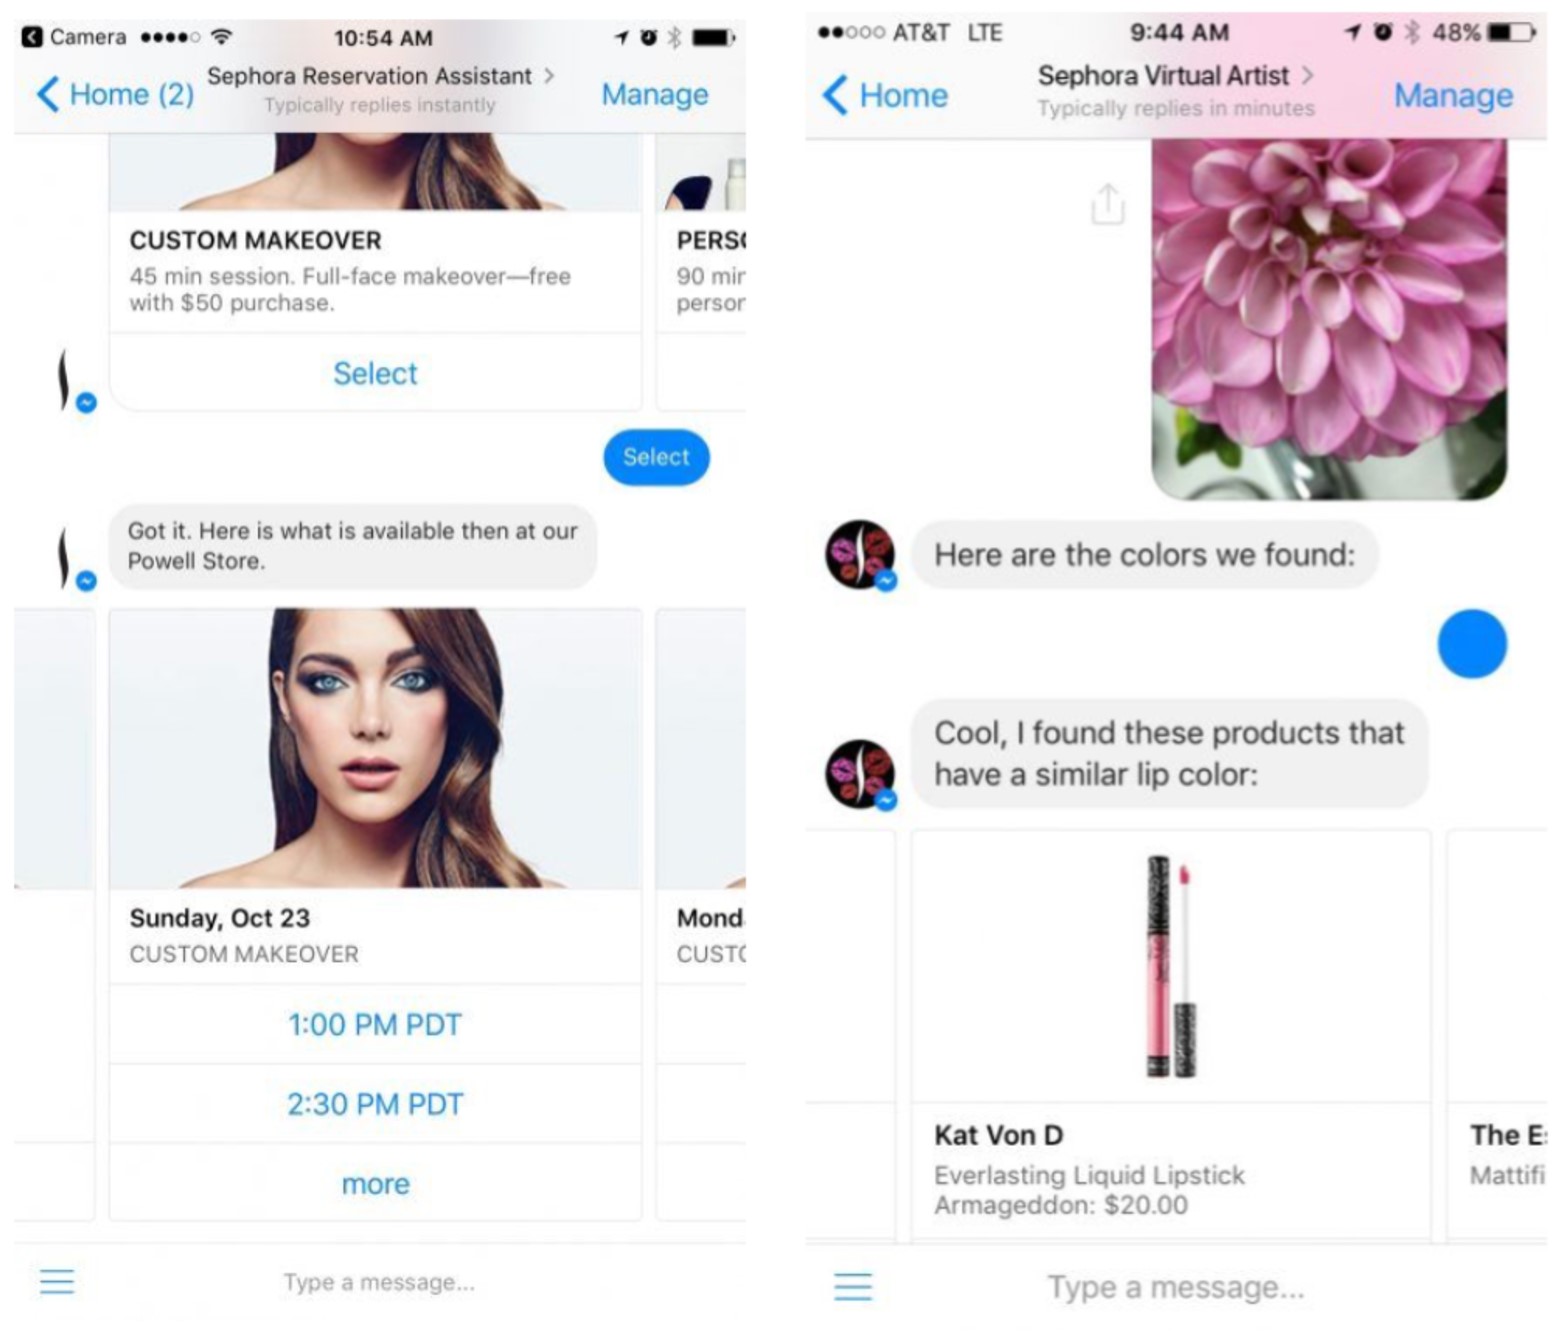 Sephora's virtual artist and assistant chatbot example